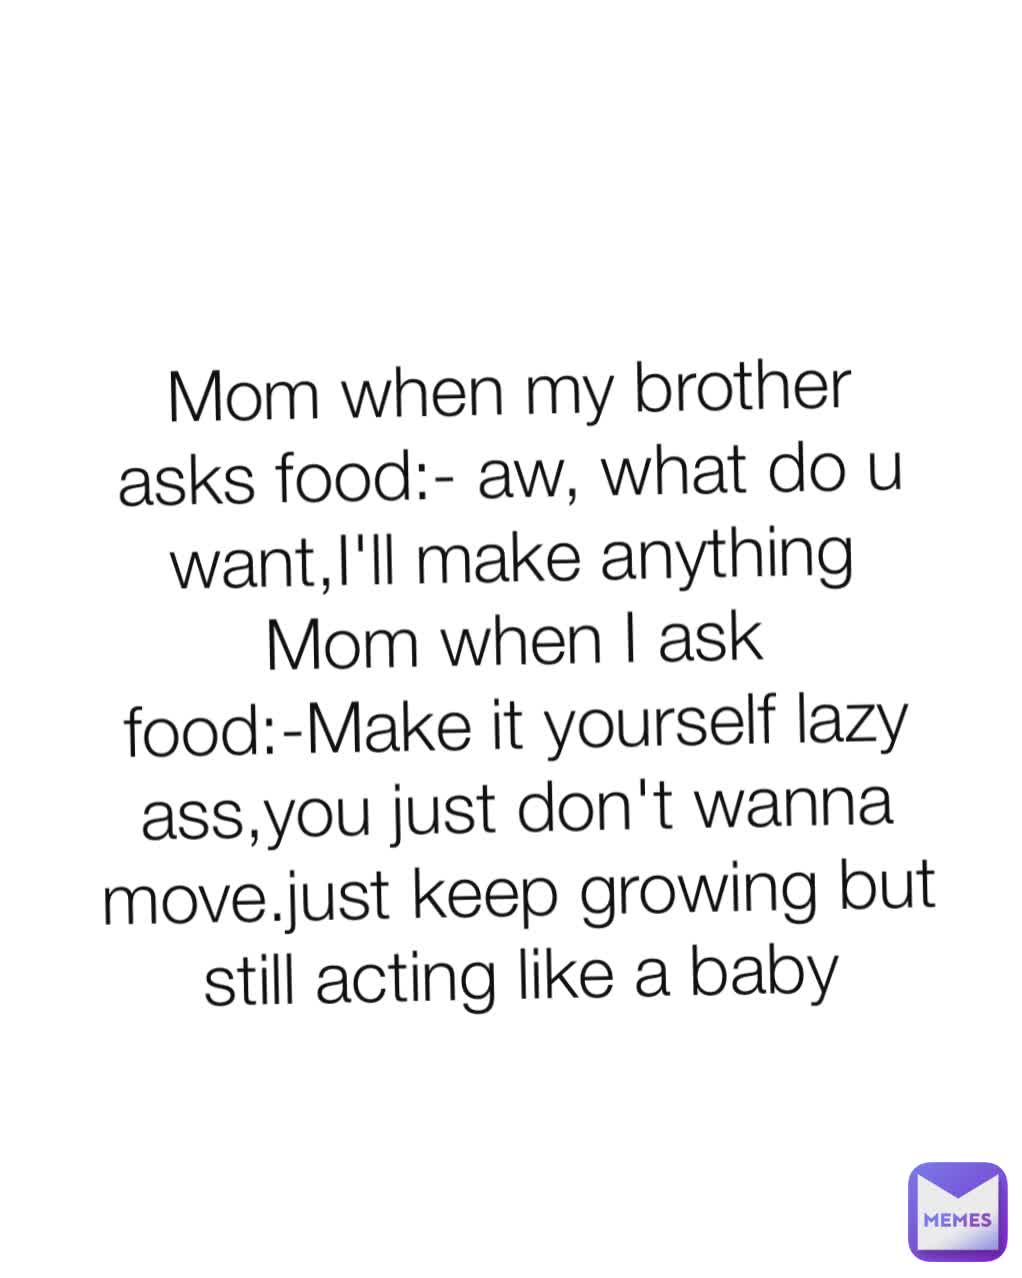 Mom when my brother asks food:- aw, what do u want,I'll make anything
Mom when I ask food:-Make it yourself lazy ass,you just don't wanna move.just keep growing but still acting like a baby